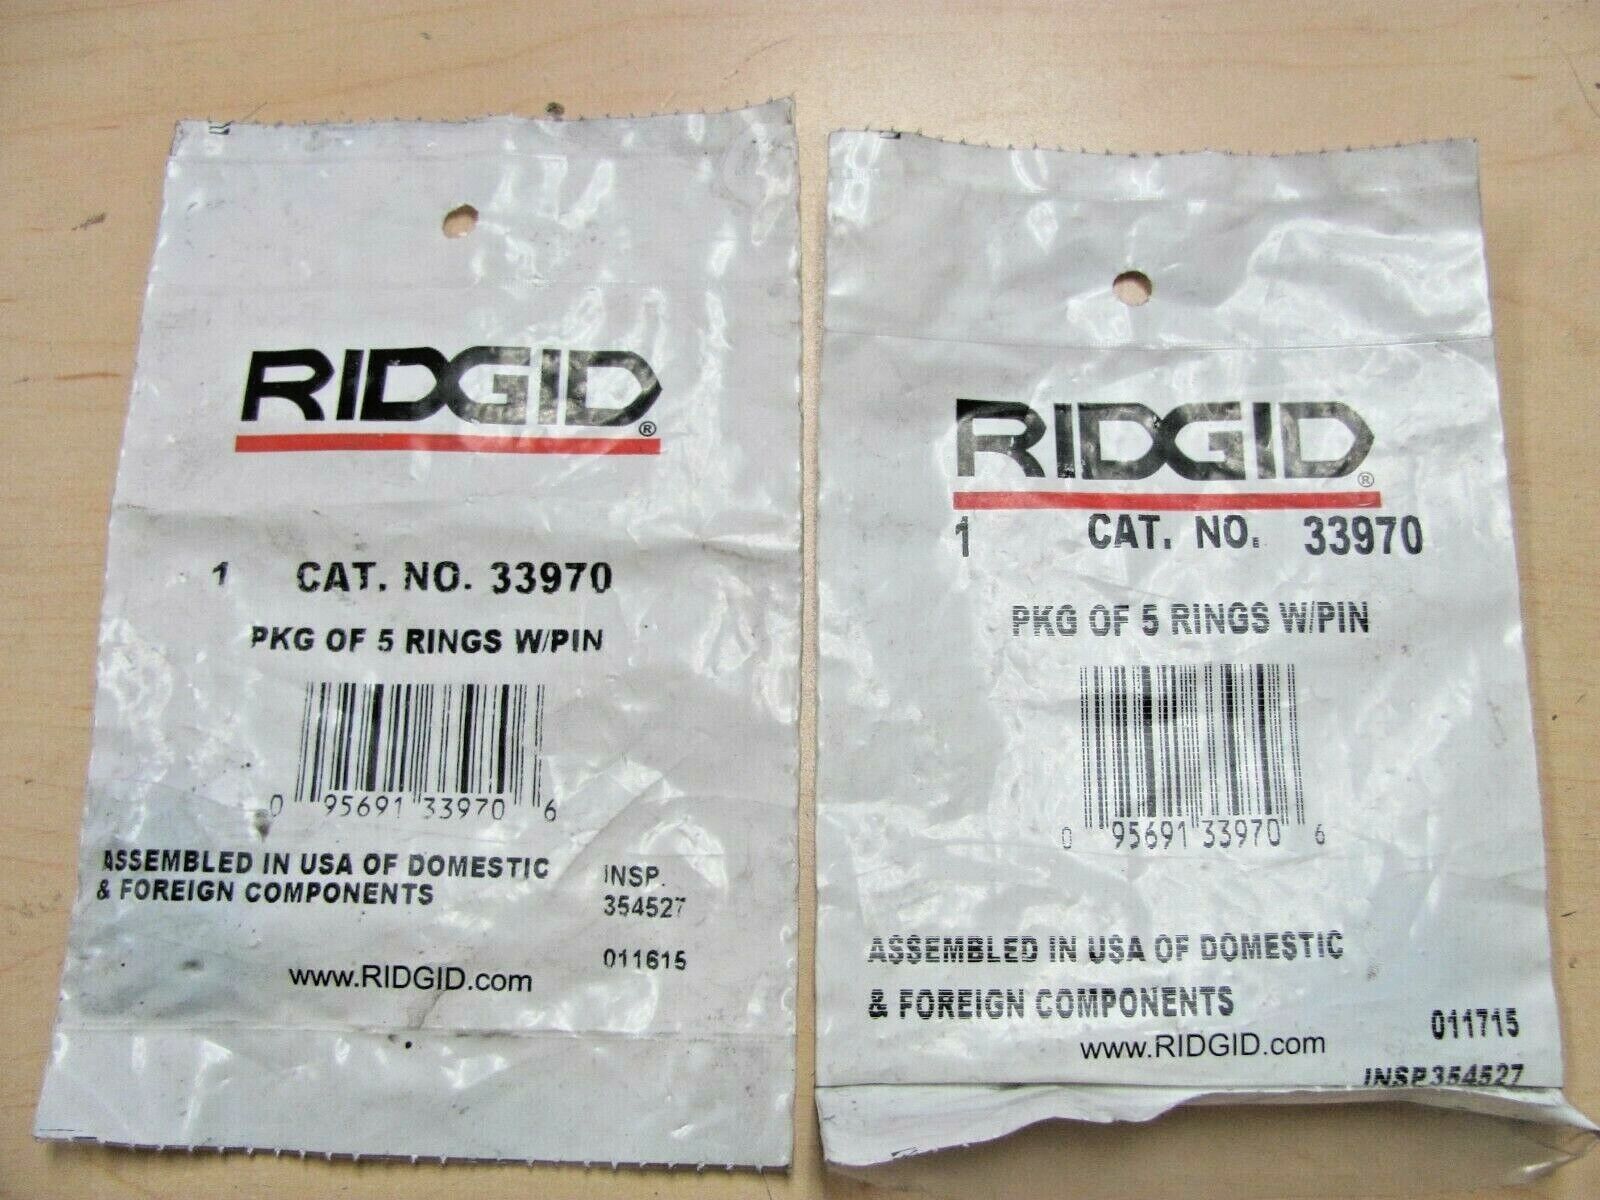 Ridgid 33970 - 2 Packages of 5 Rings with Pins Ea. - 10 Rings & Pins Altogether RIDGID 33970